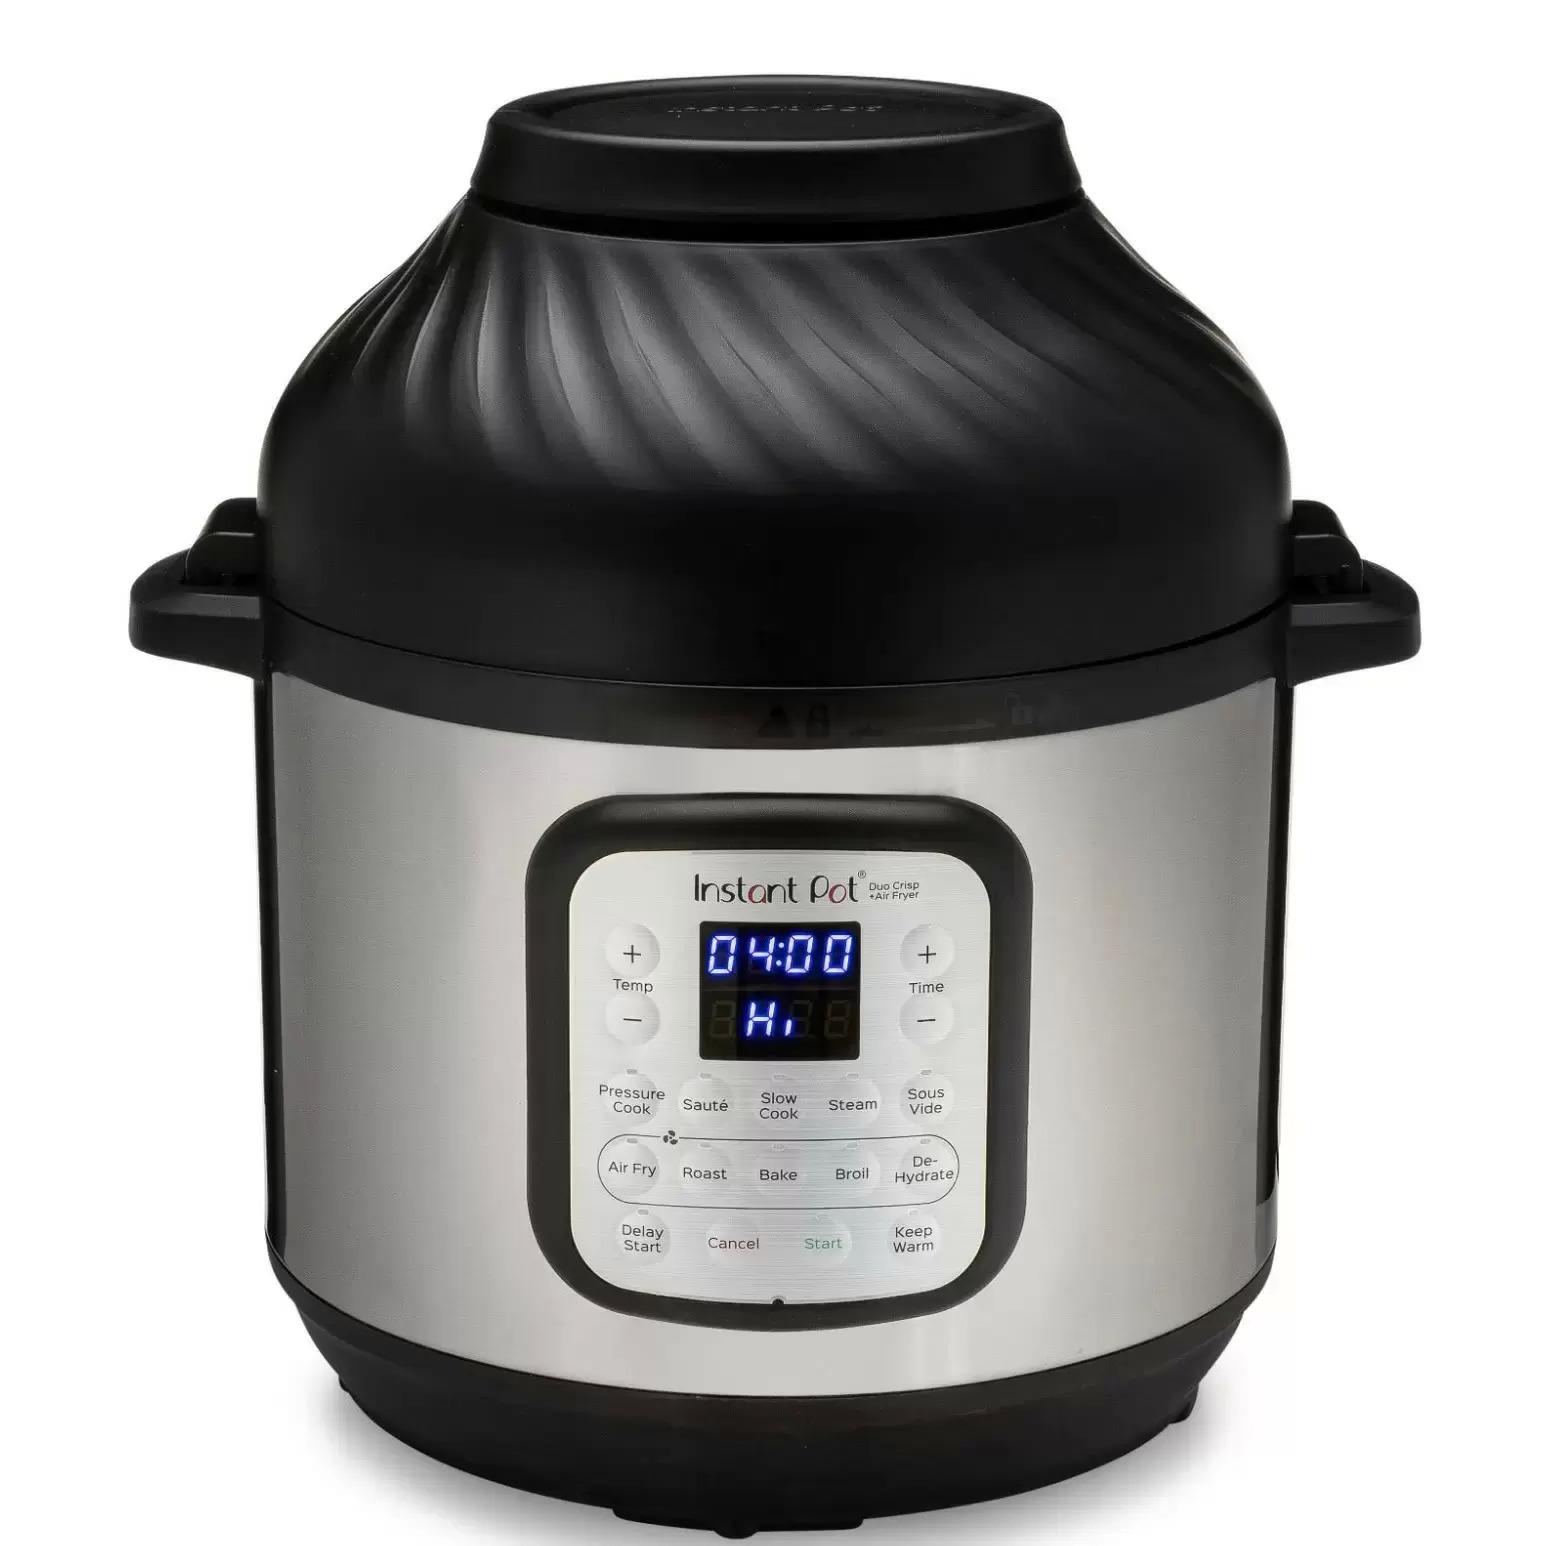 6Q Instant Pot 11-in-1 Duo Crisp Pressure Cooker for $77.99 Shipped